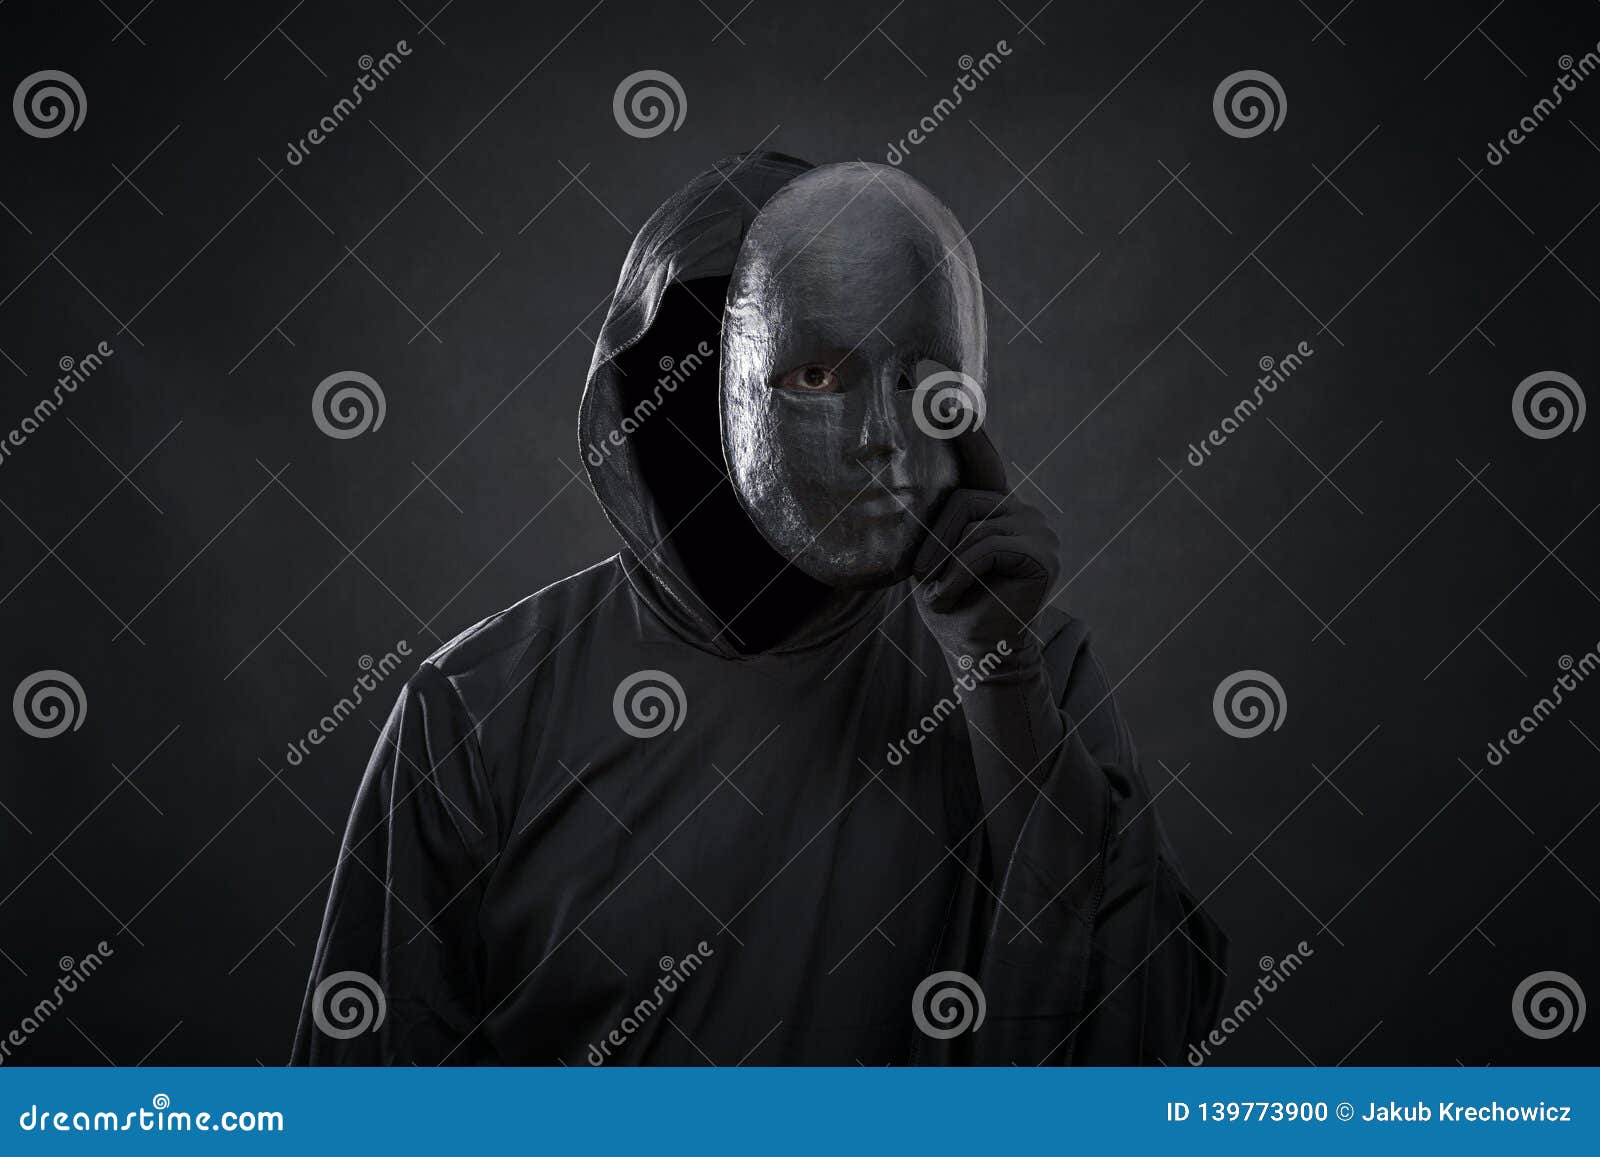 scary figure in hooded cloak with mask in hand